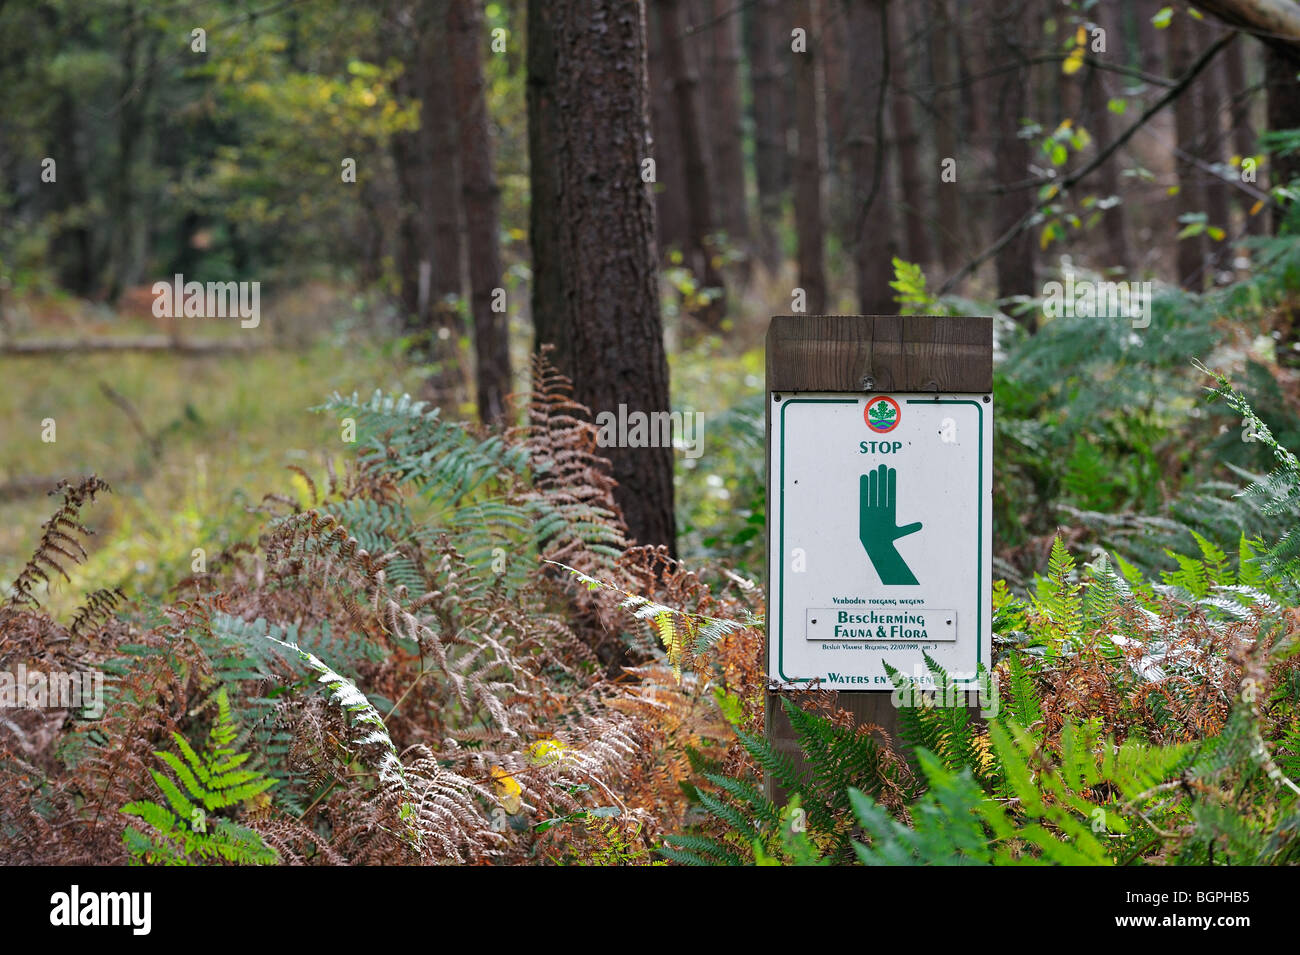 Prohibition stop sign with hand symbol to create quiet rest area in forest of nature reserve Meerdaalwoud, Belgium Stock Photo